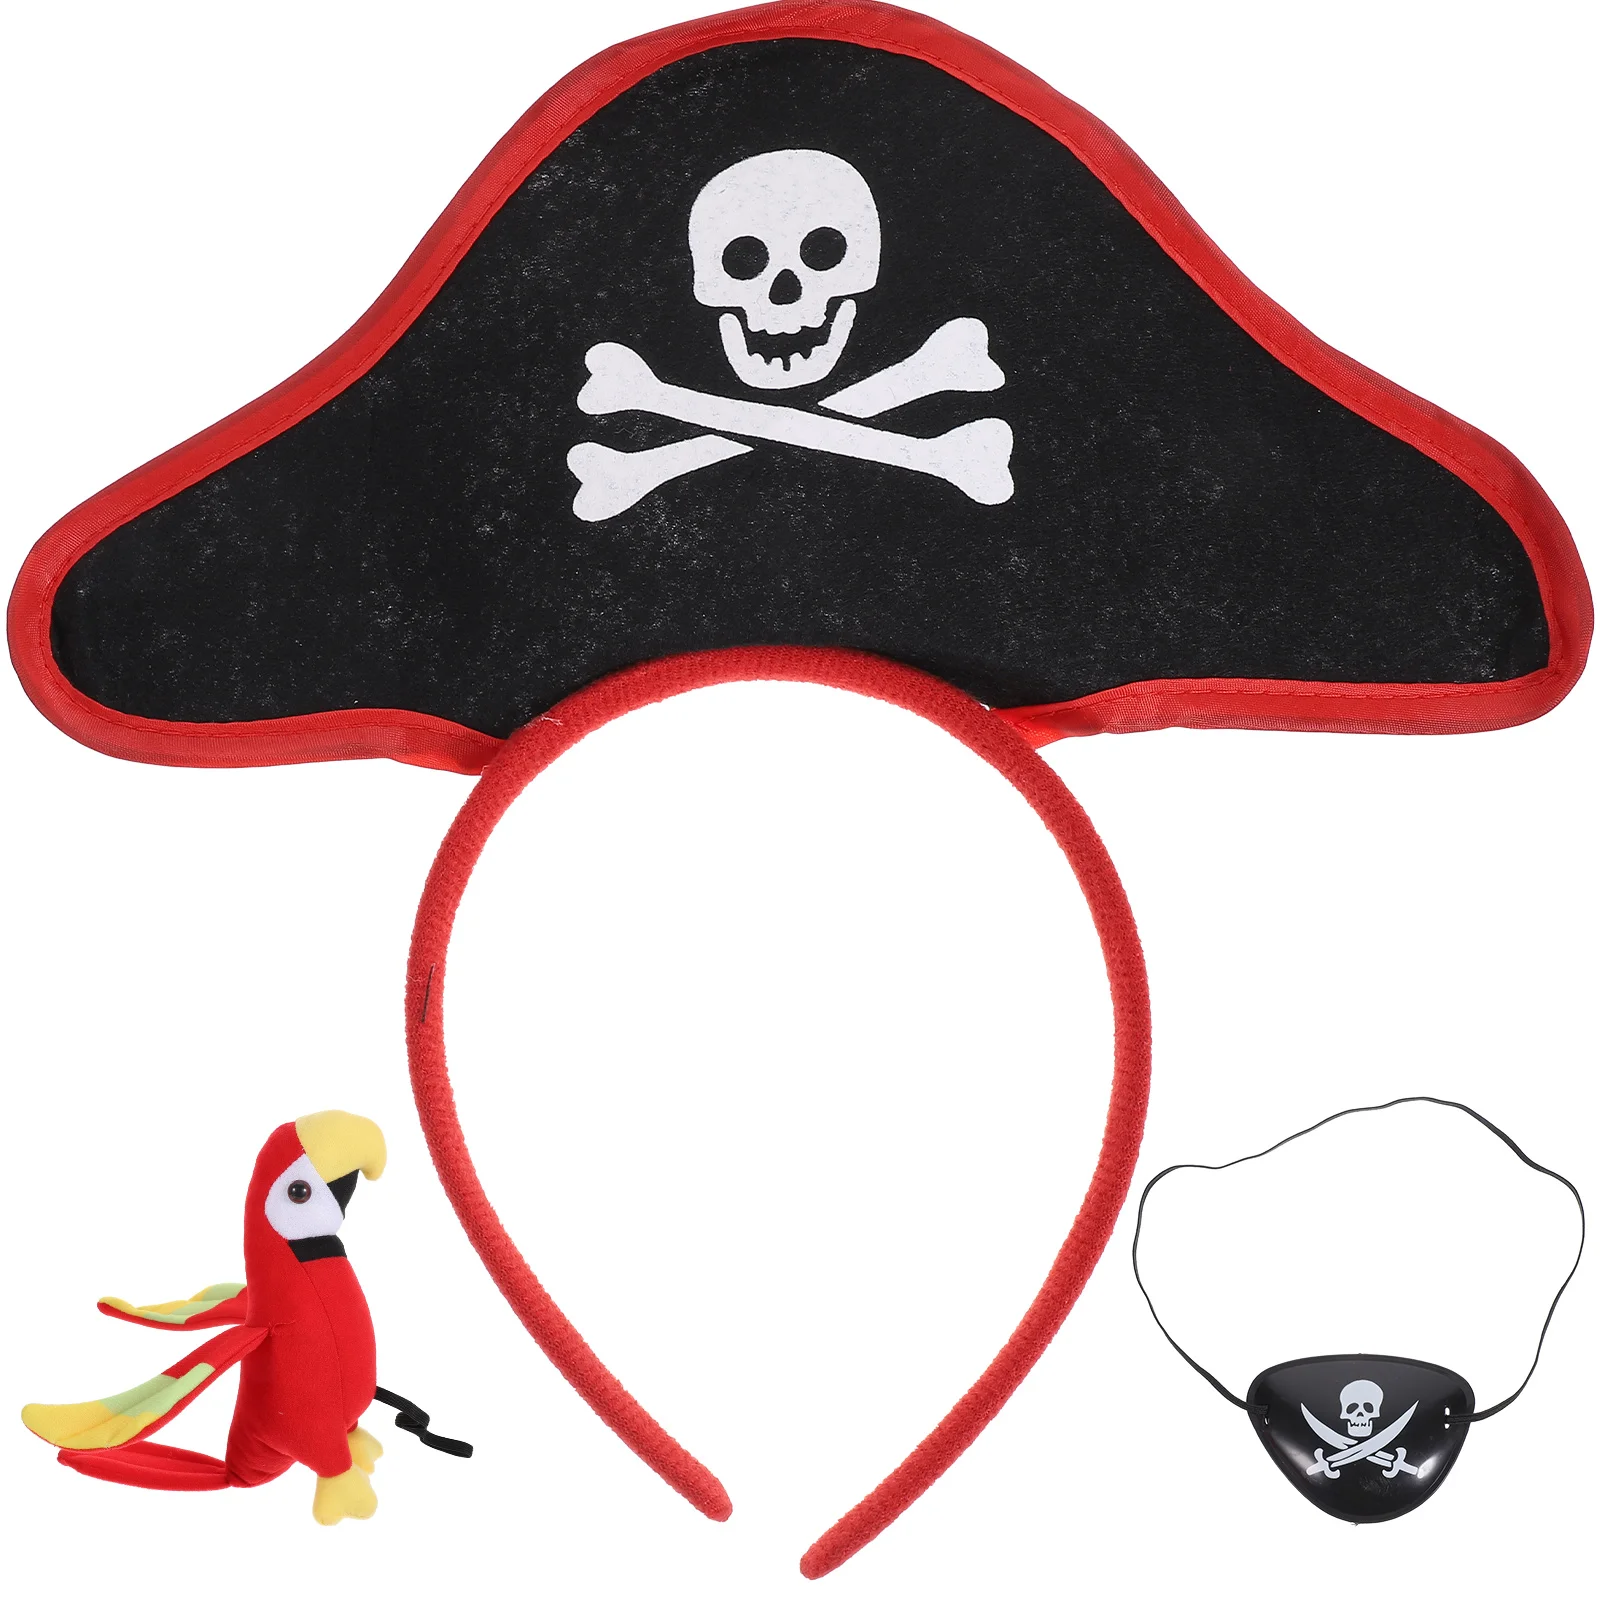 

Kids Toys Plush Parrot Pirate Eye Patches Bird For Shoulder Costume Accessory Stuffed Child Dress Up Props Masquerade Party